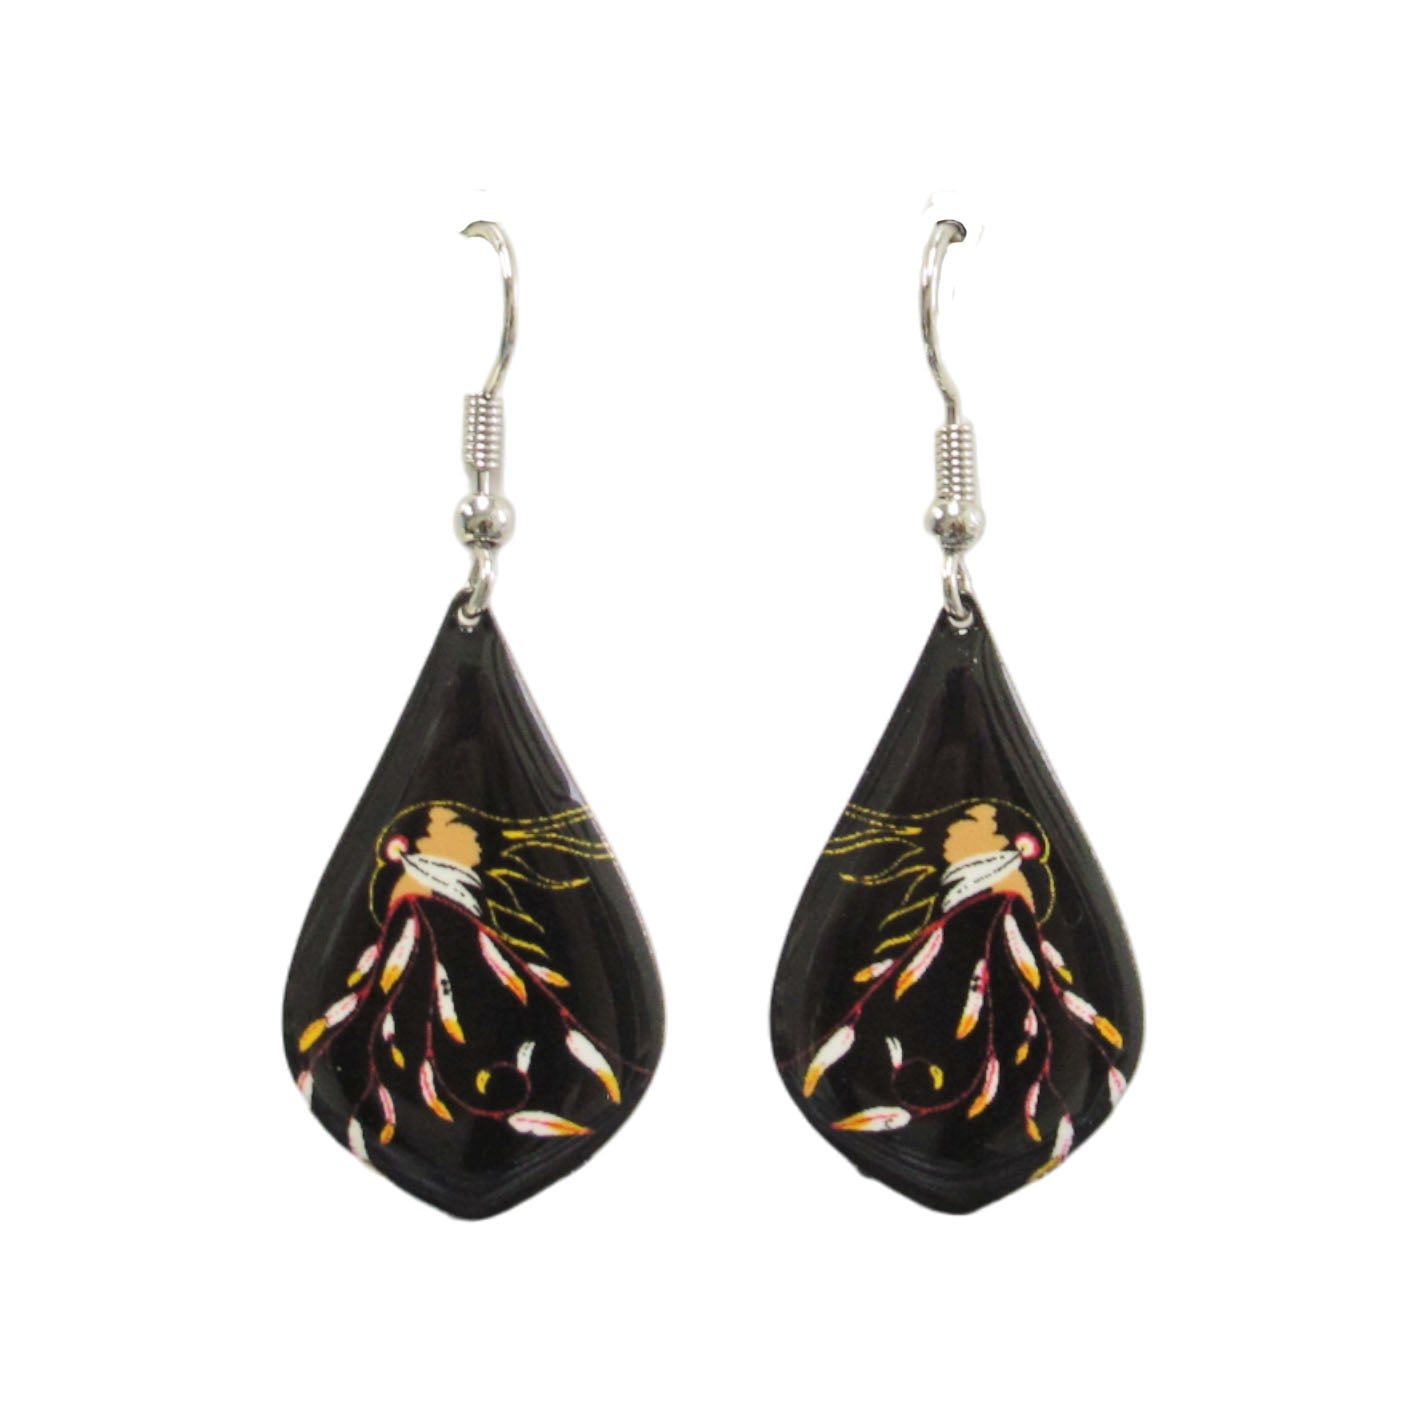 Maxine Noel Eagle's Gift Gallery Collection Earrings